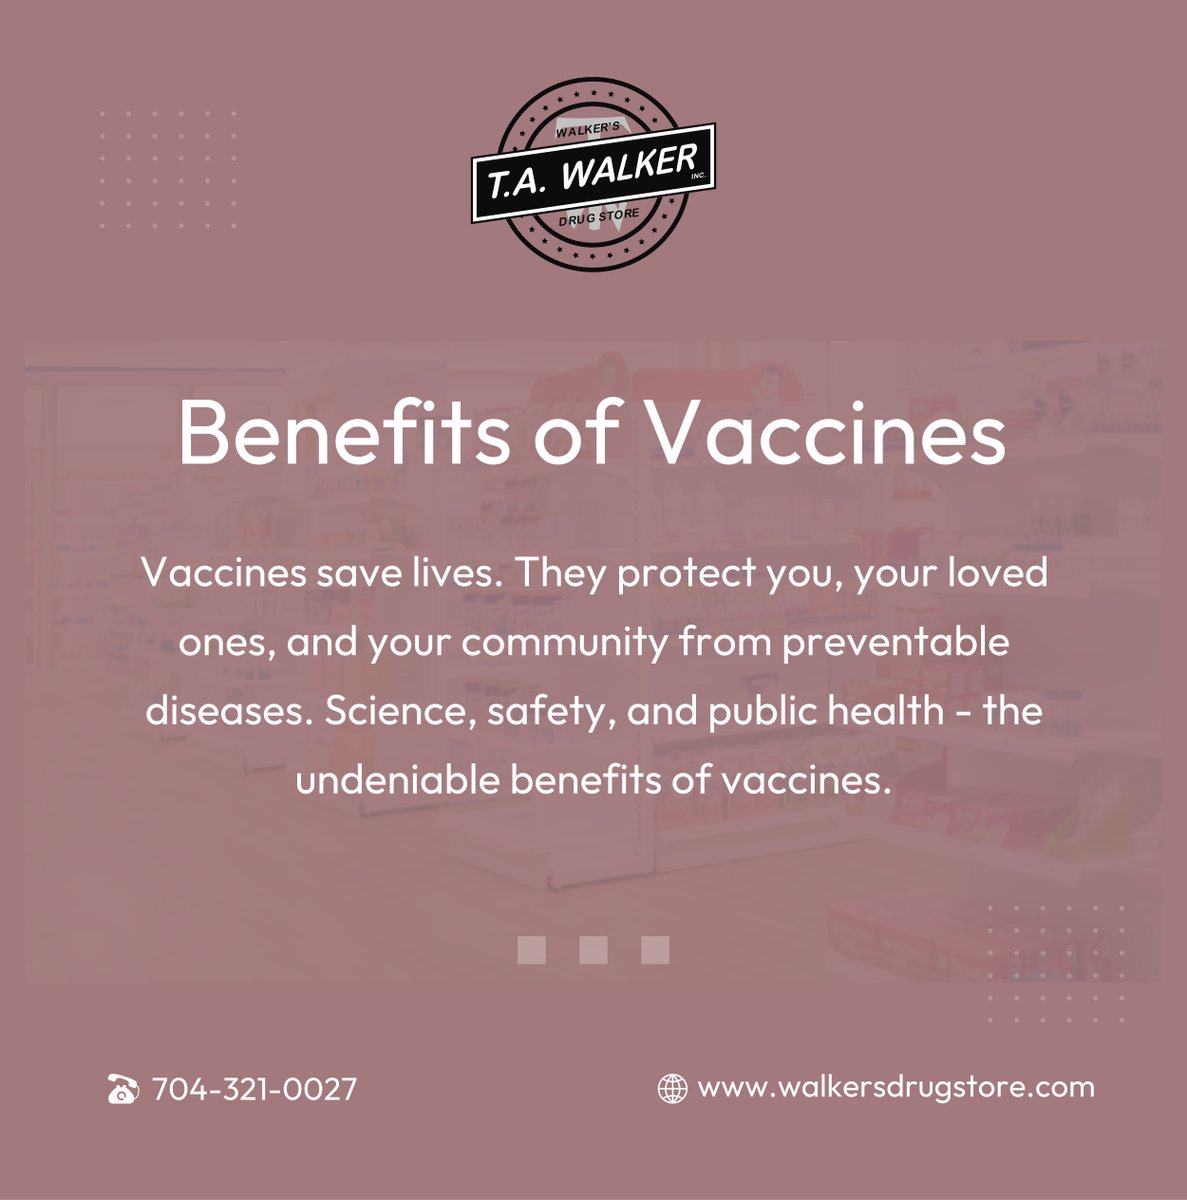 Vaccines save lives, protect communities, and offer hope. Discover the science-backed benefits of vaccination, from disease prevention to global health impact.

#CharlotteNC #VaccineBenefits #Pharmacy